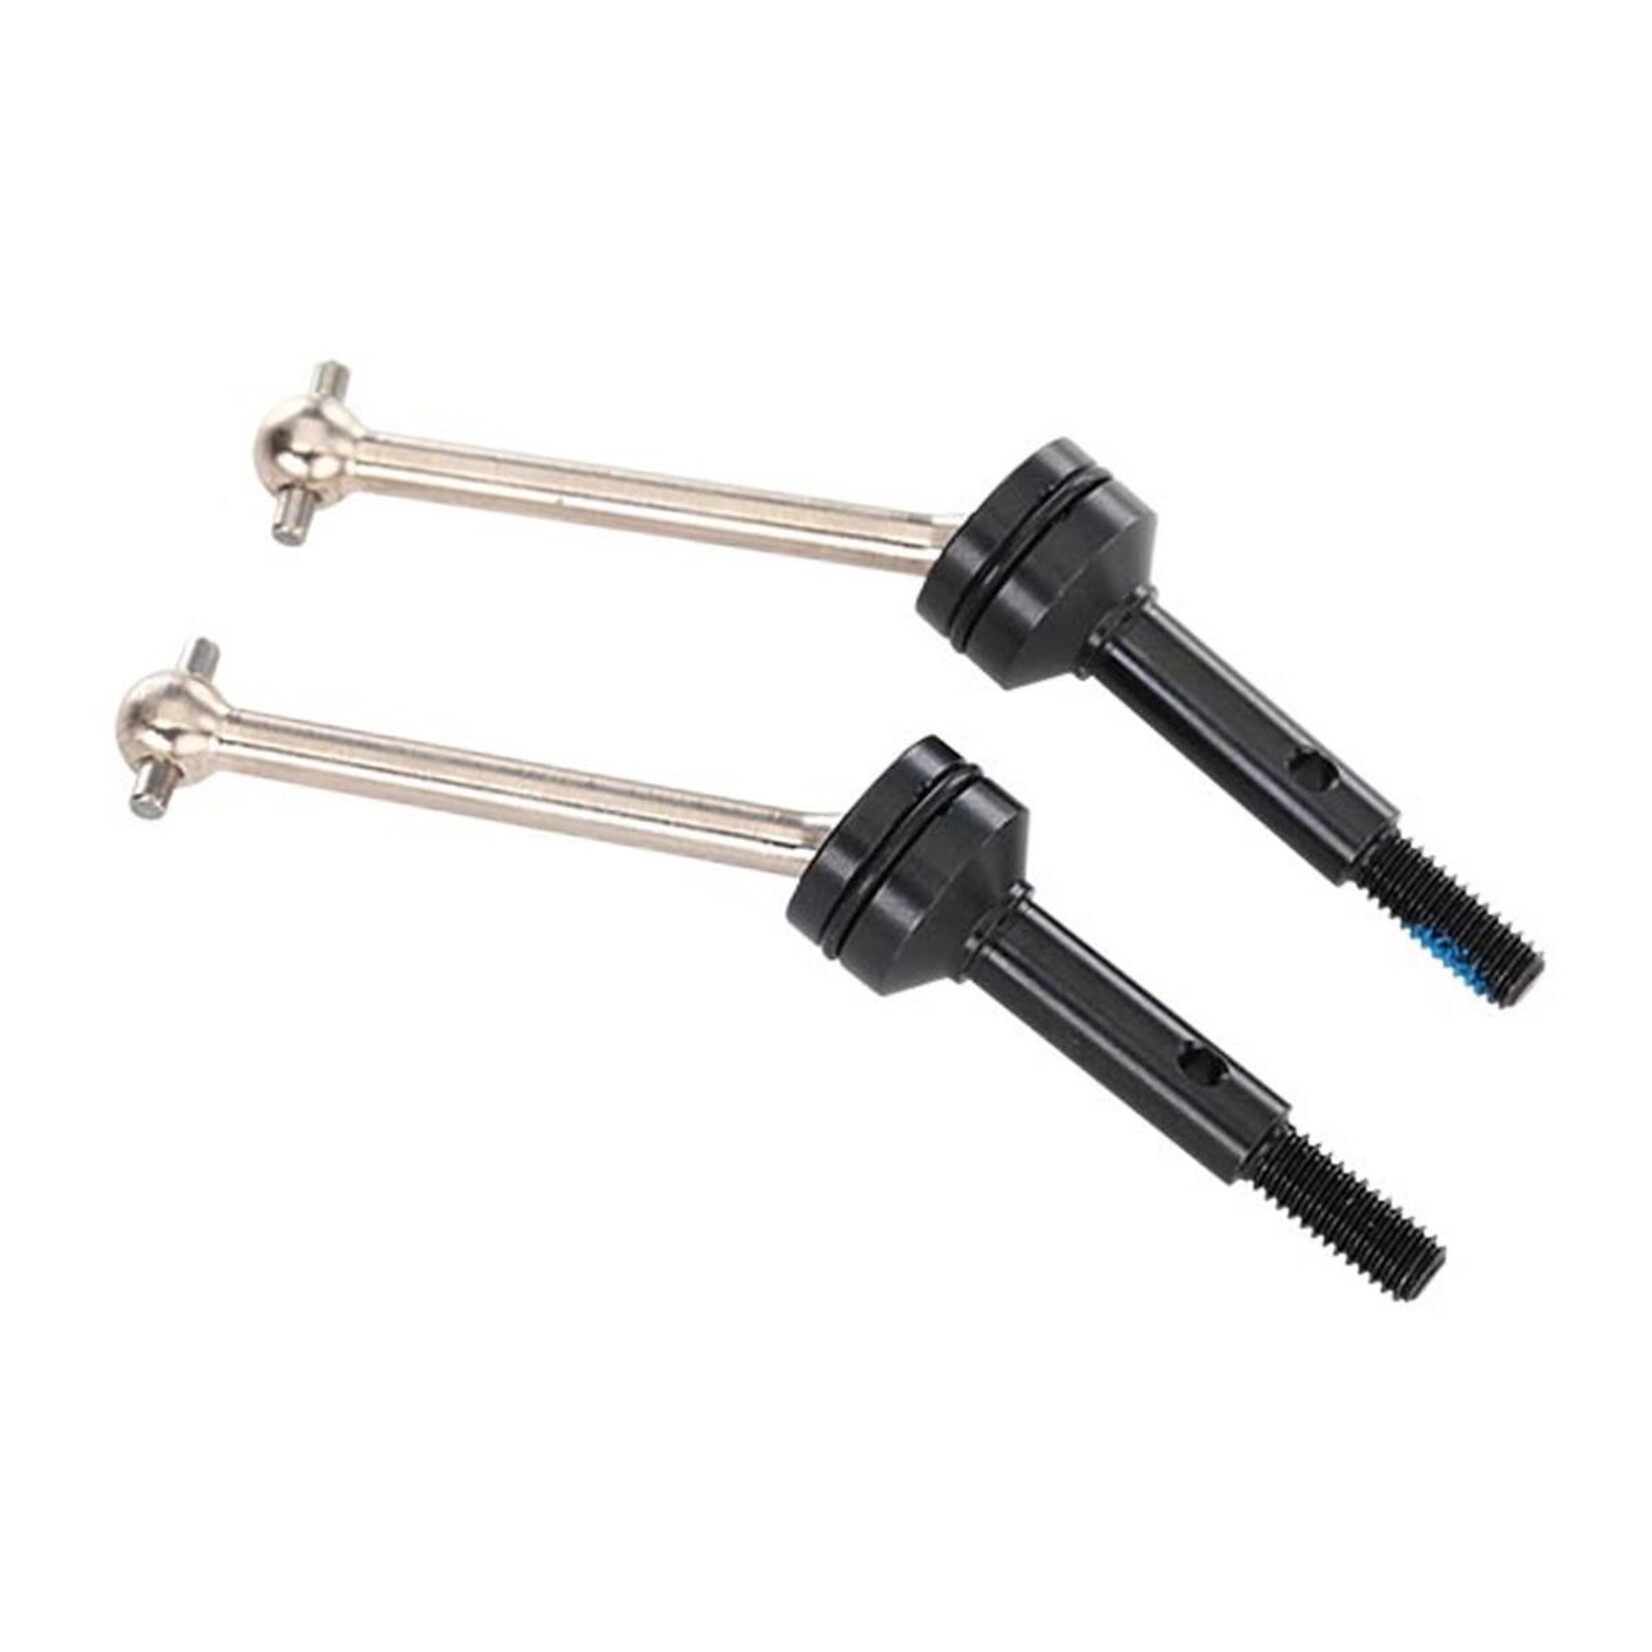 Traxxas Traxxas 4-Tec 2.0/3.0 Steel Front Constant-Velocity Driveshafts (2) #8350X